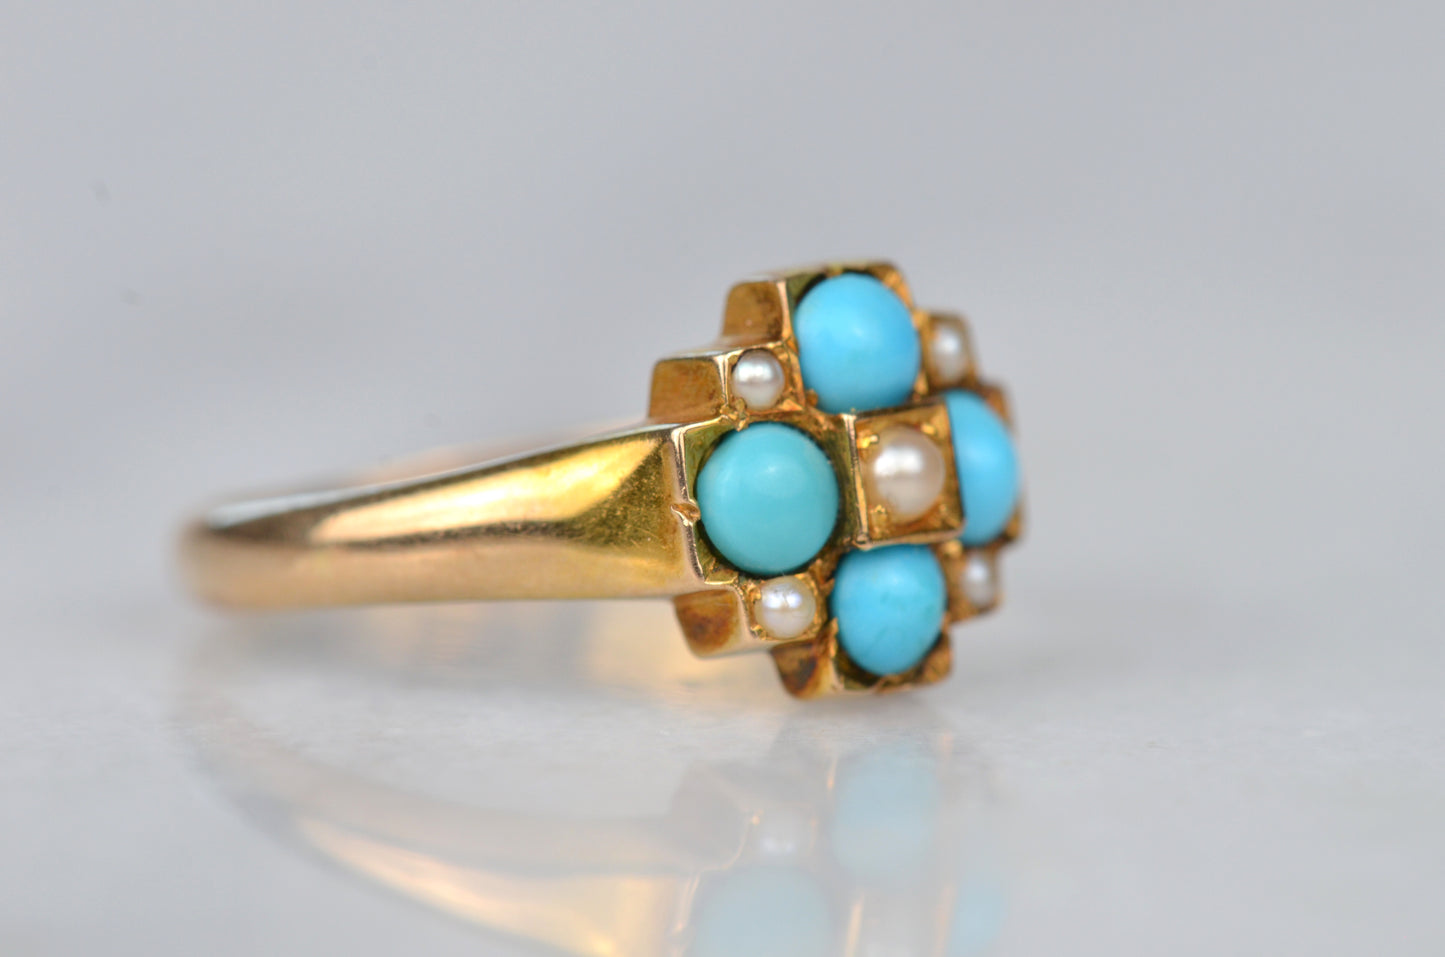 Stunning Antique Pearl and Turquoise Cluster Ring